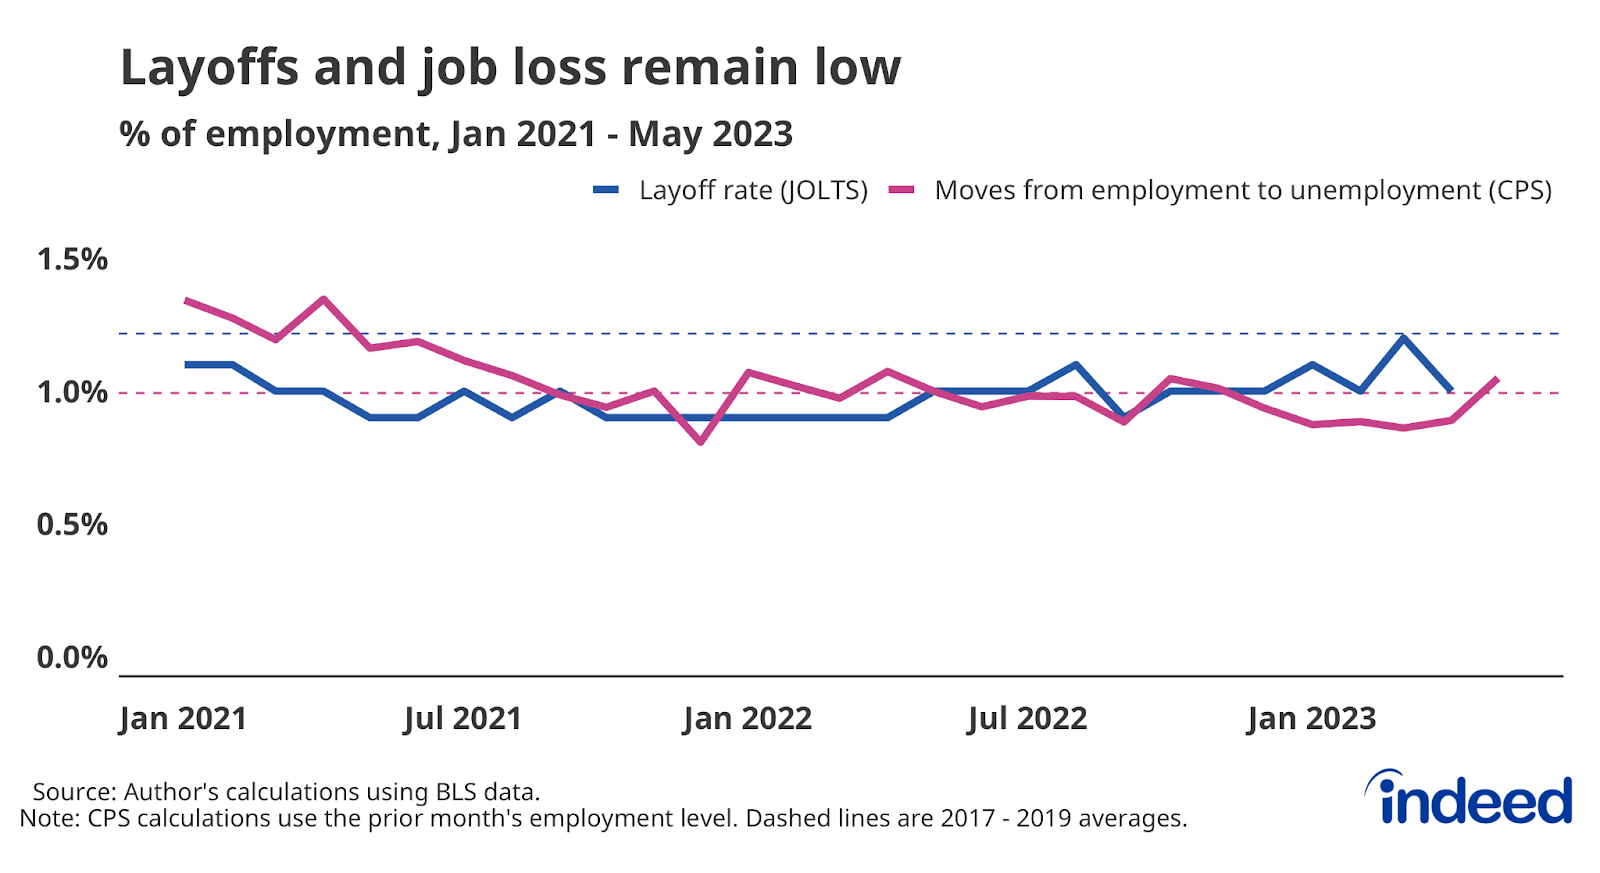 Line graph titled “Layoffs and job loss remain low” with a vertical axis ranging from 0% to 1.5%, covering January 2021 to May 2023. The graph shows two measures of worker job-loss rates remaining at low levels over 2022 and into 2023.